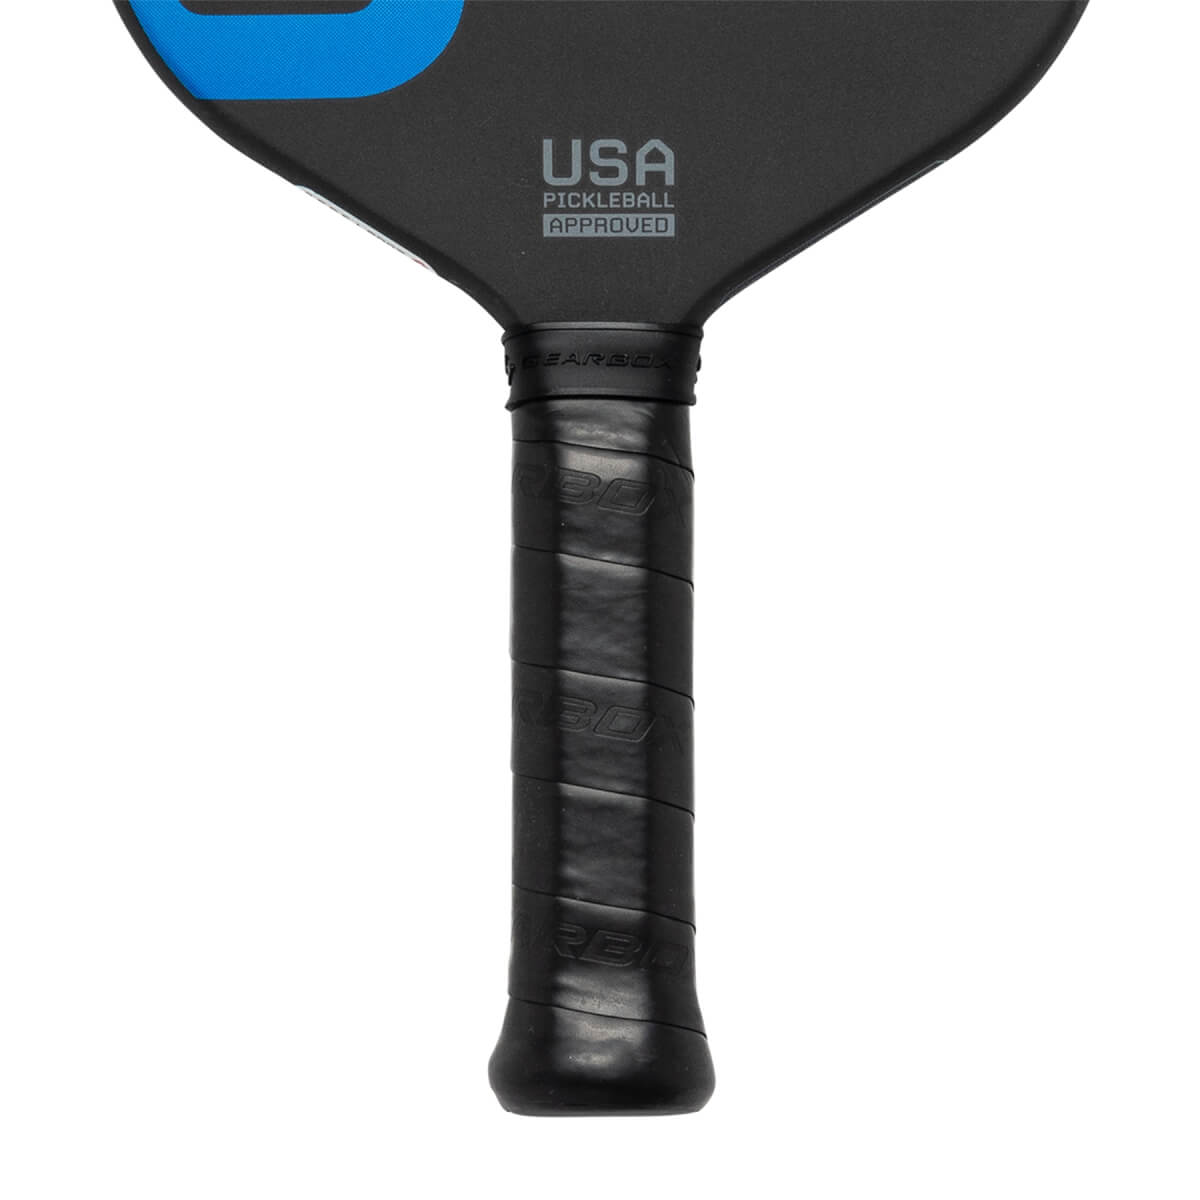 Gearbox Pickleball Paddle G2 Elongated - 14mm - 8.0oz - 4" Grip